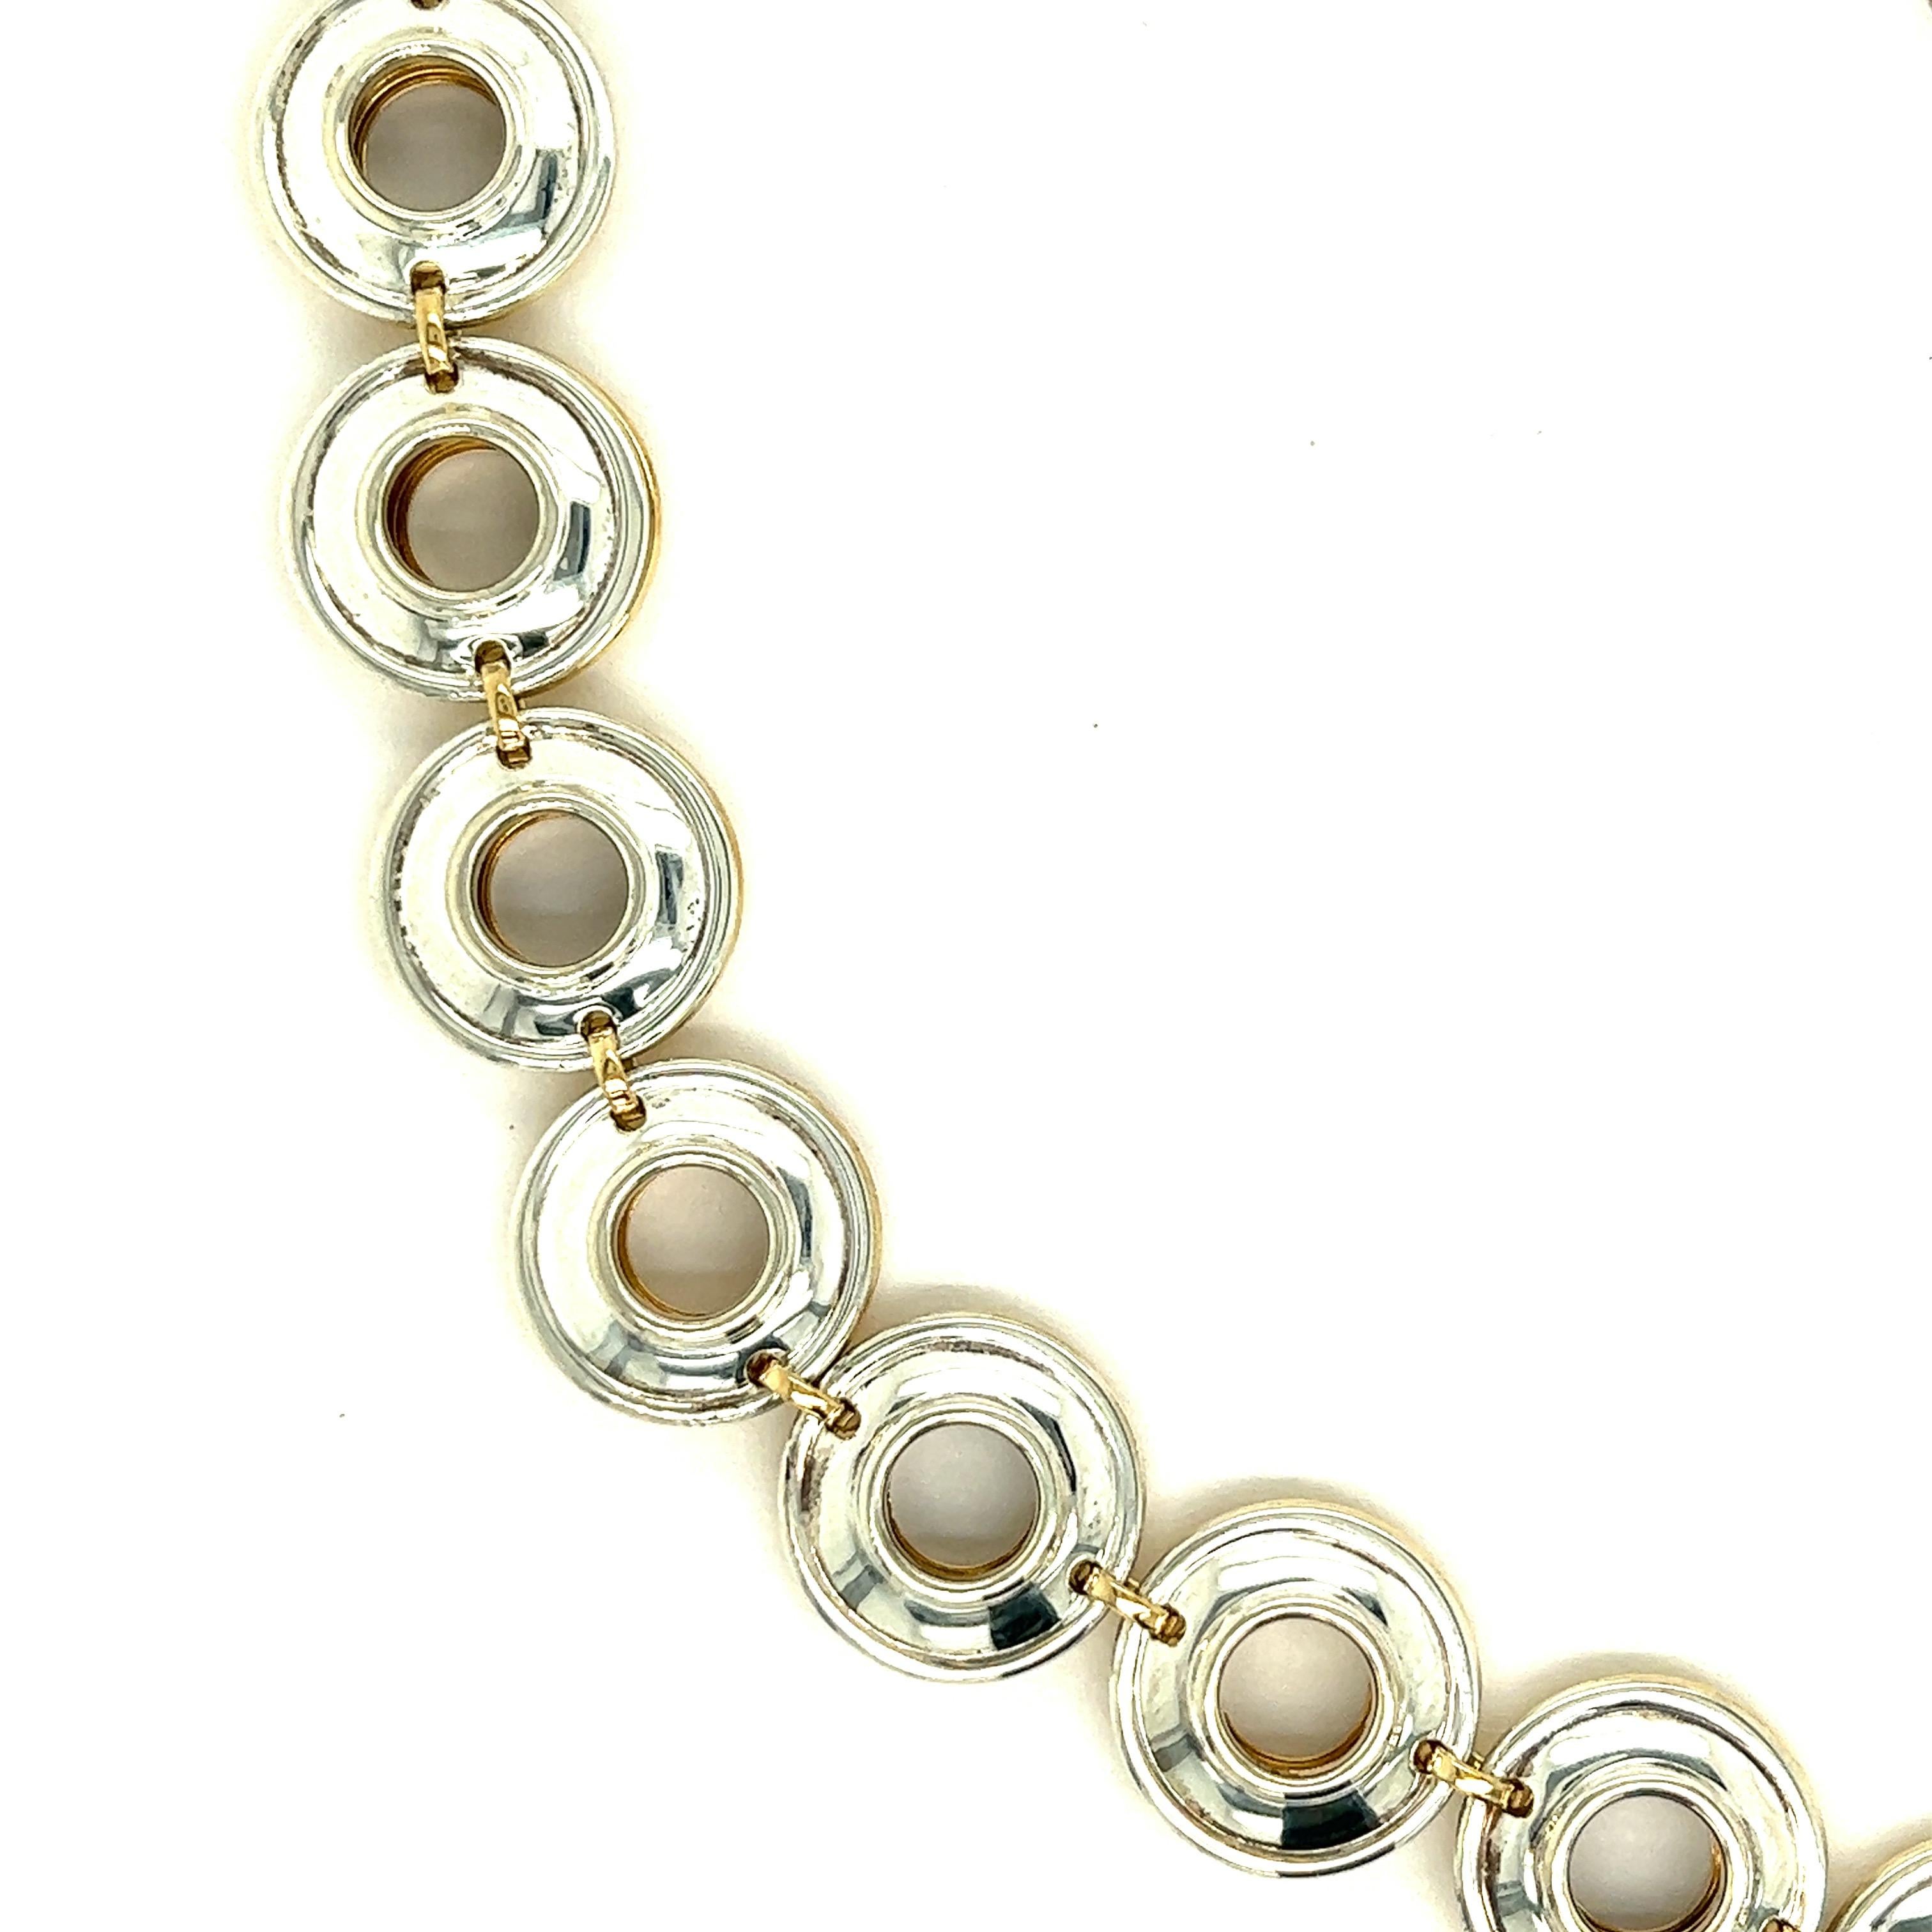 Paloma Picasso for Tiffany & Co. 18k Yellow Gold & Silver Link Necklace

Composed of concave circular links, one side is made of 18 karat yellow gold and the other is made of silver, featuring a toggle clasp; marked Paloma Picasso, Tiffany & Co.,